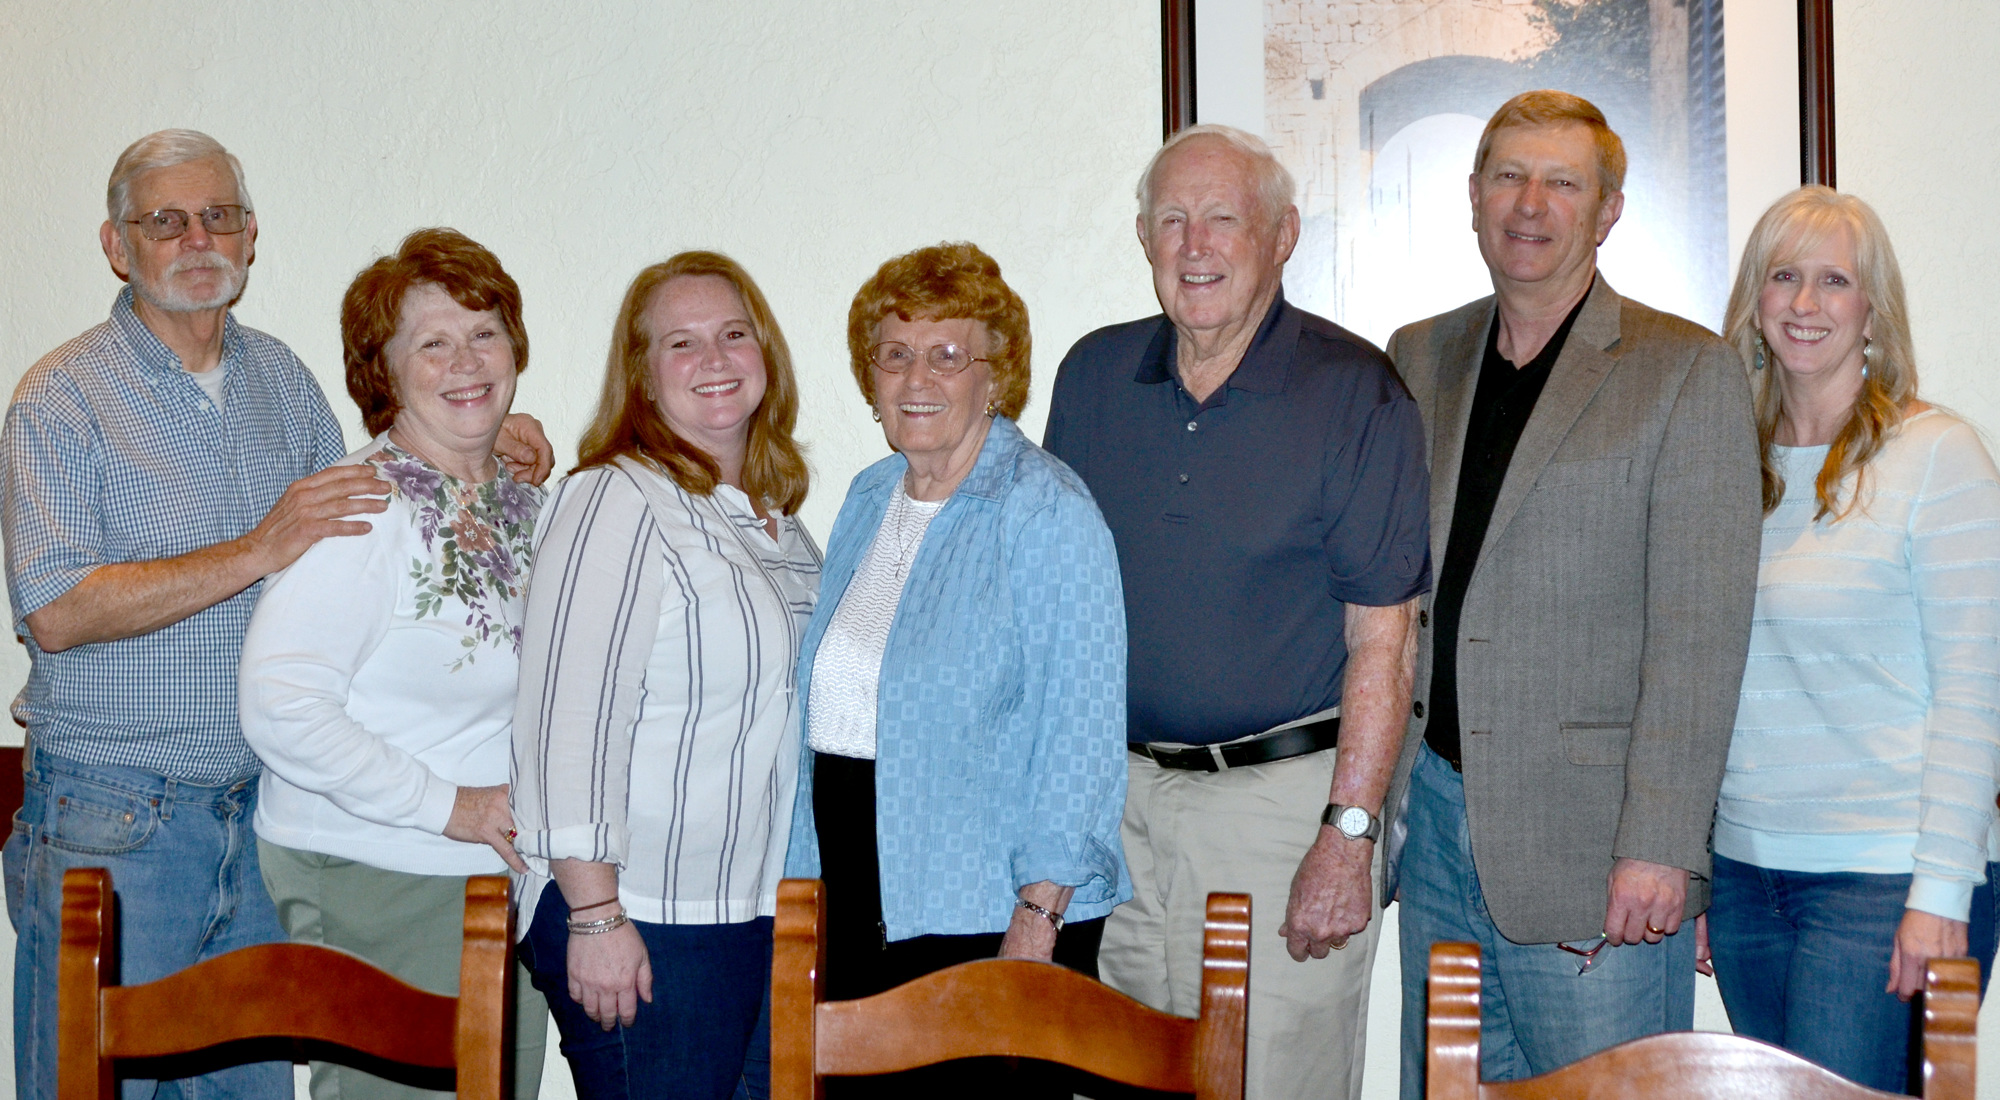 Jack and Gloria Quesinberry celebrate his 84th birthday with just about every family member, including their five children: Rusty Jenkins, left, Kathy Taylor, Jeni McNeill, Rory Quesinberry and Amy Quesinberry.